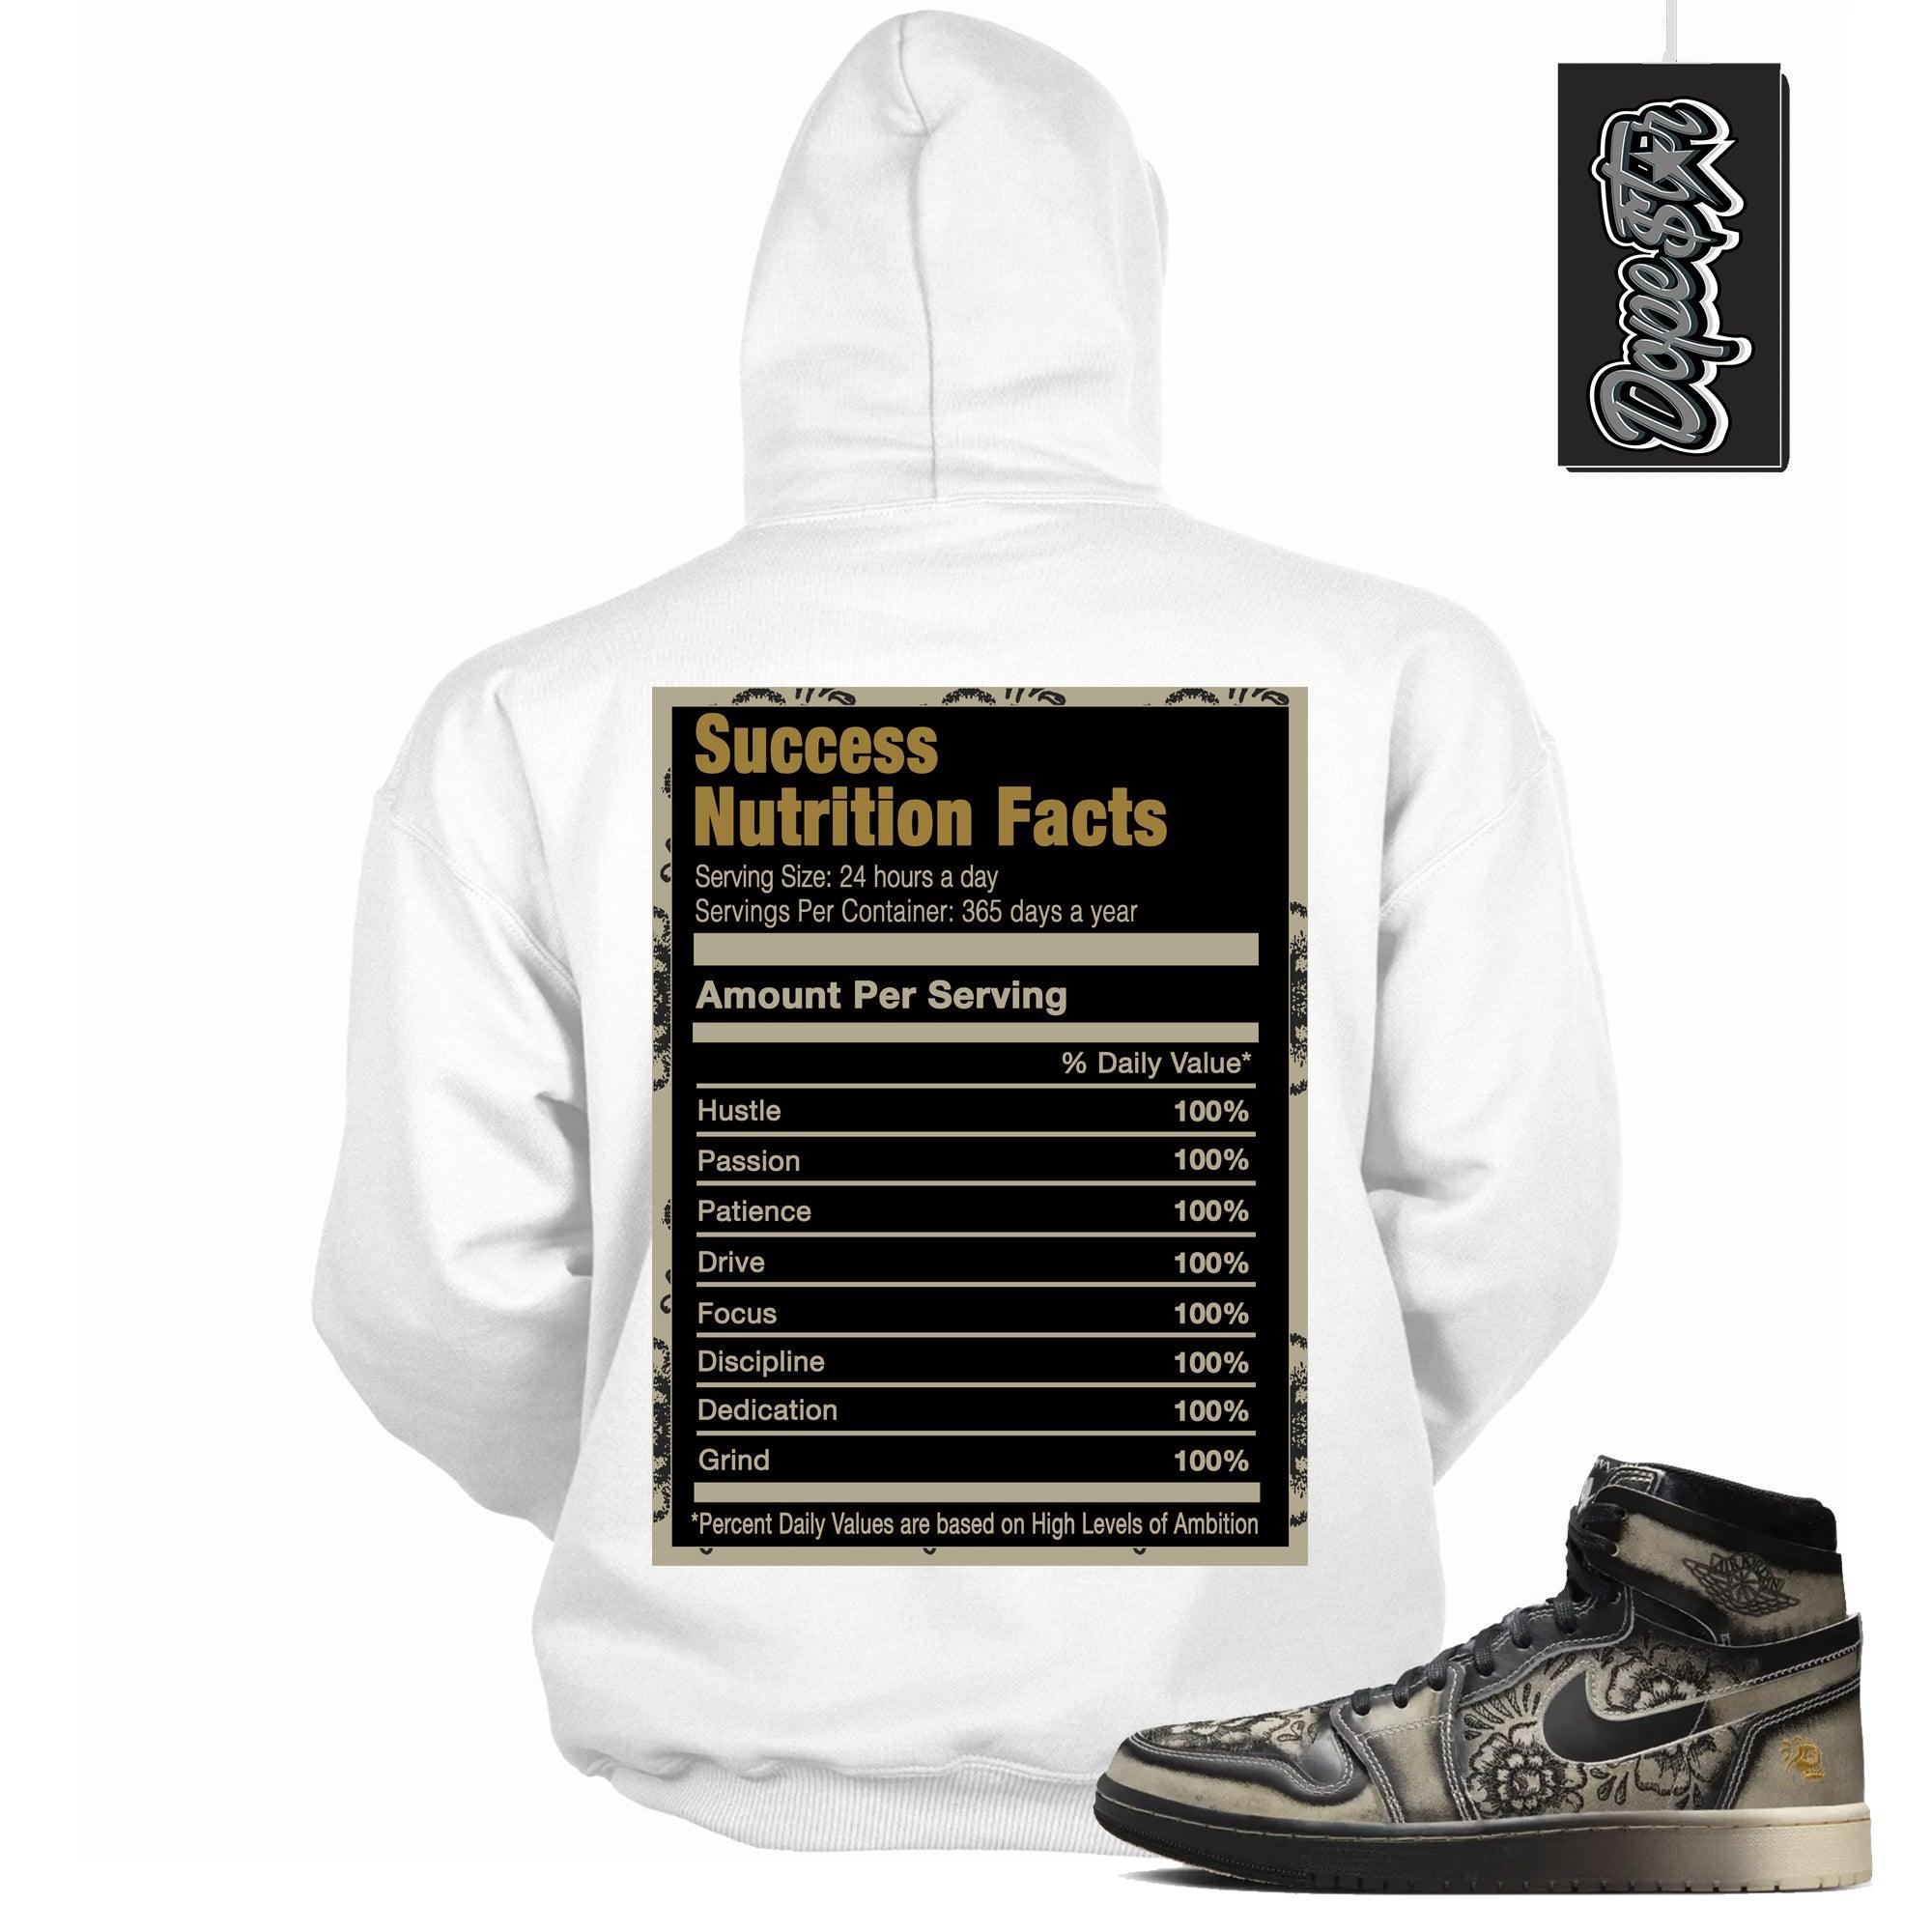 Cool White Graphic Hoodie with “ Success Nutrition “ print, that perfectly matches Air Jordan 1 High Zoom Comfort 2 Dia de Muertos Black and Pale Ivory sneakers